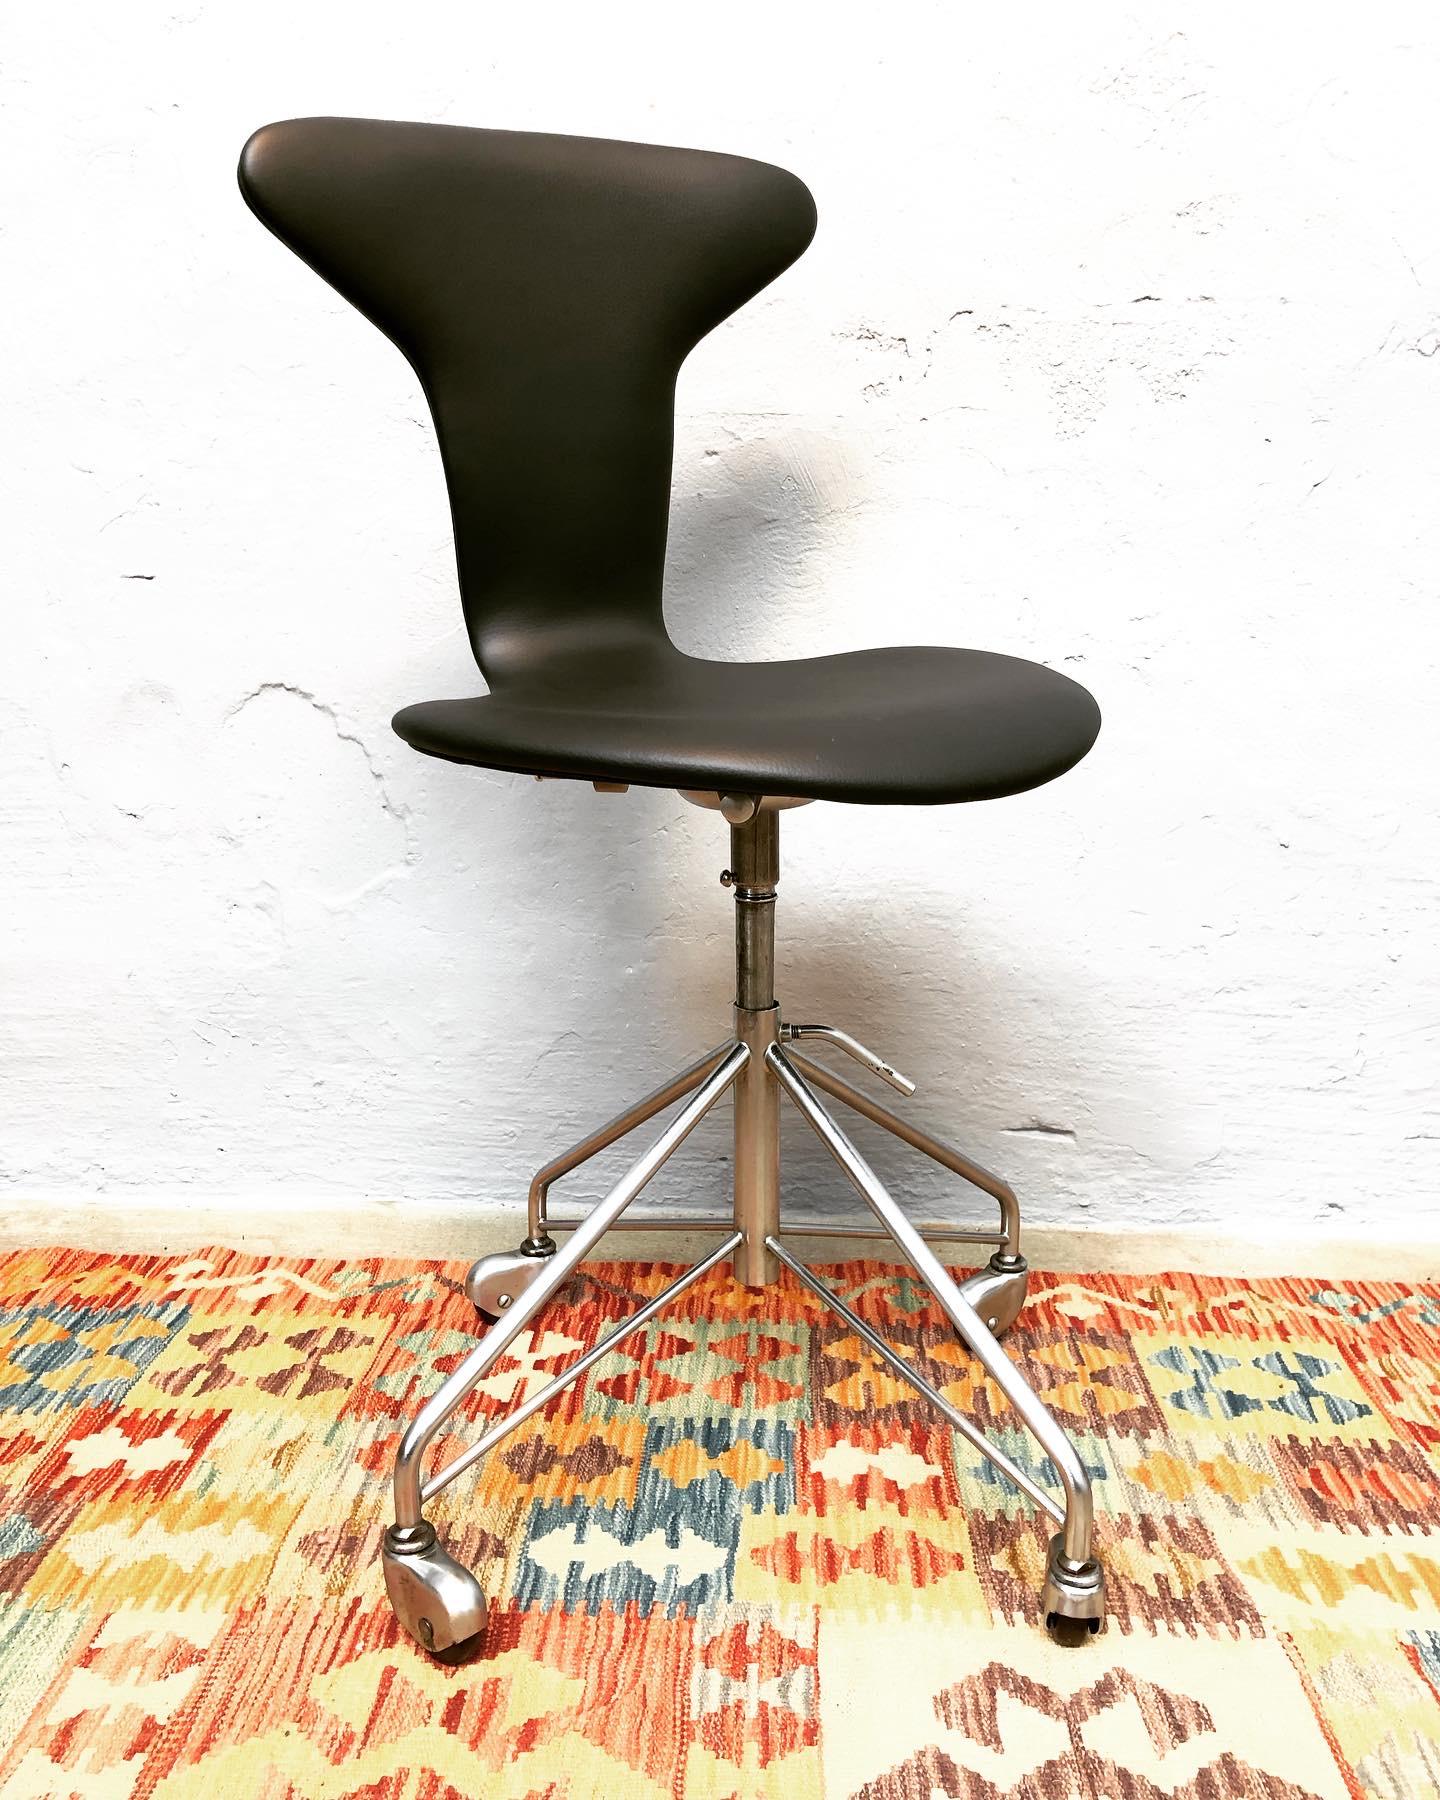 Vintage Arne Jacobsen Munkegaard office swivel stool model 3115 from 1964 with its original label. 
This stool is in great condition and has been recently refurbished professionally in black semi anilin leather.
With all its original parts, wheels